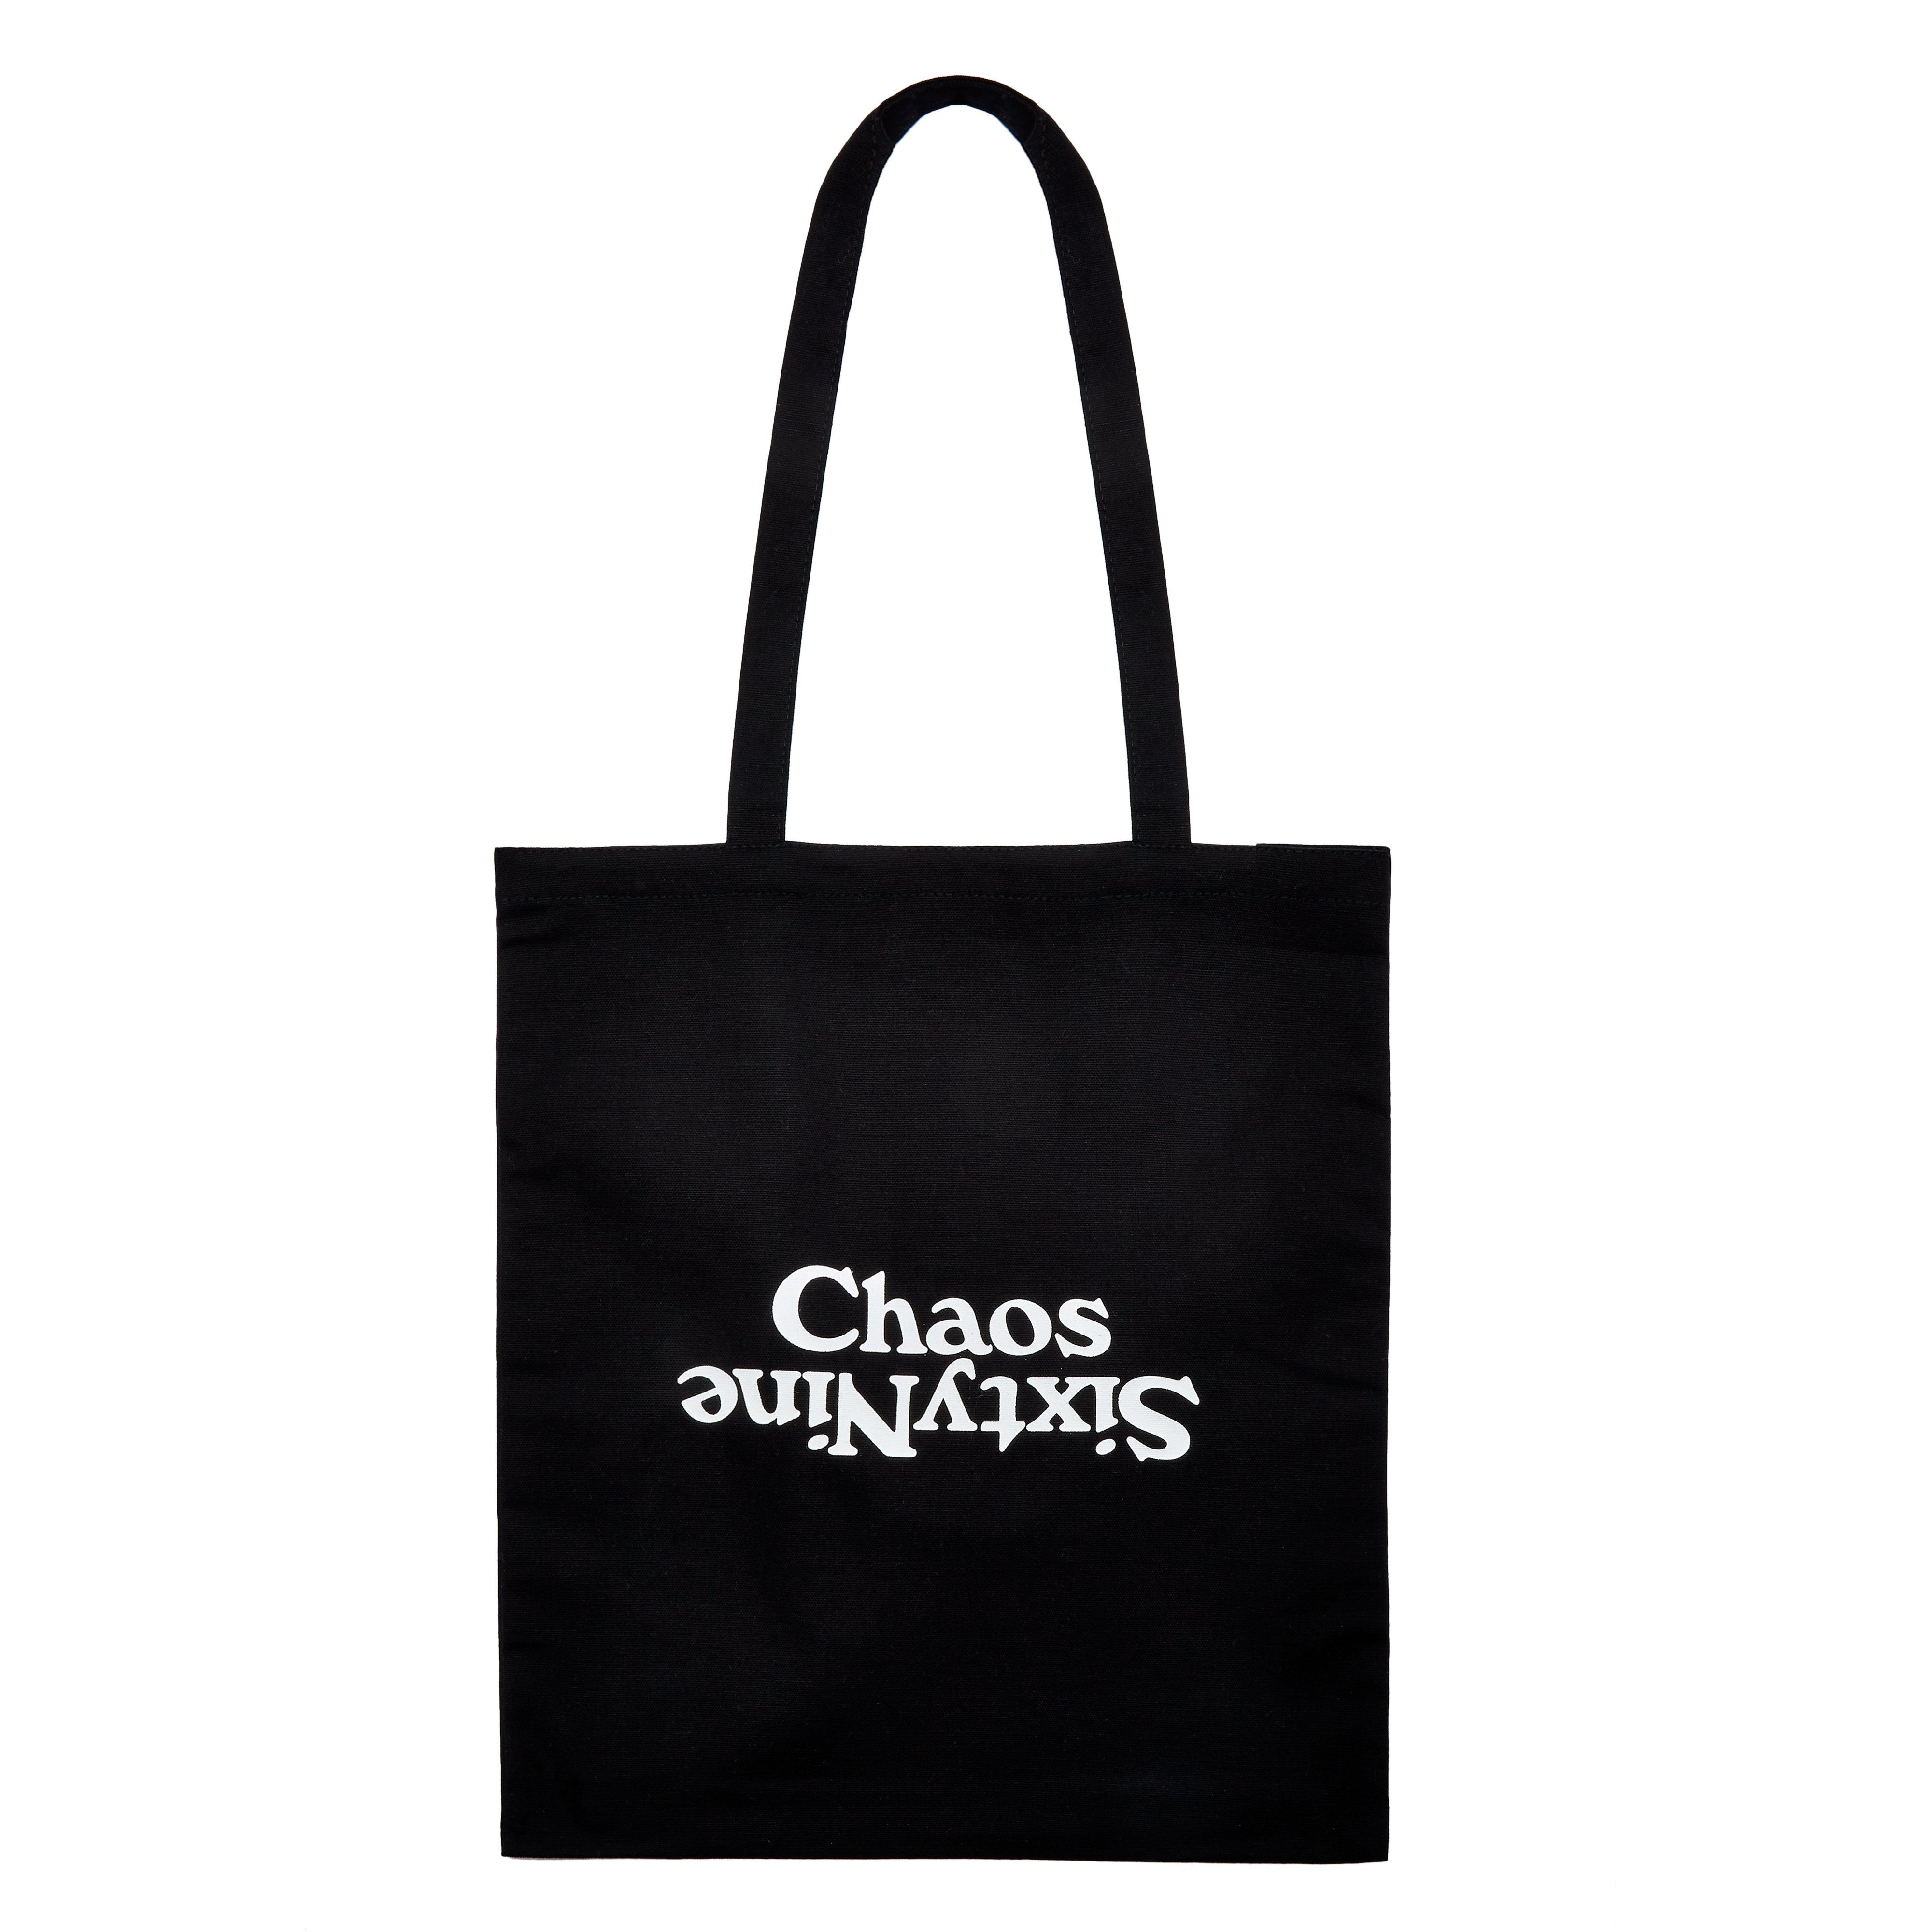 Chaos SixtyNine Tote Bag by CHAOS